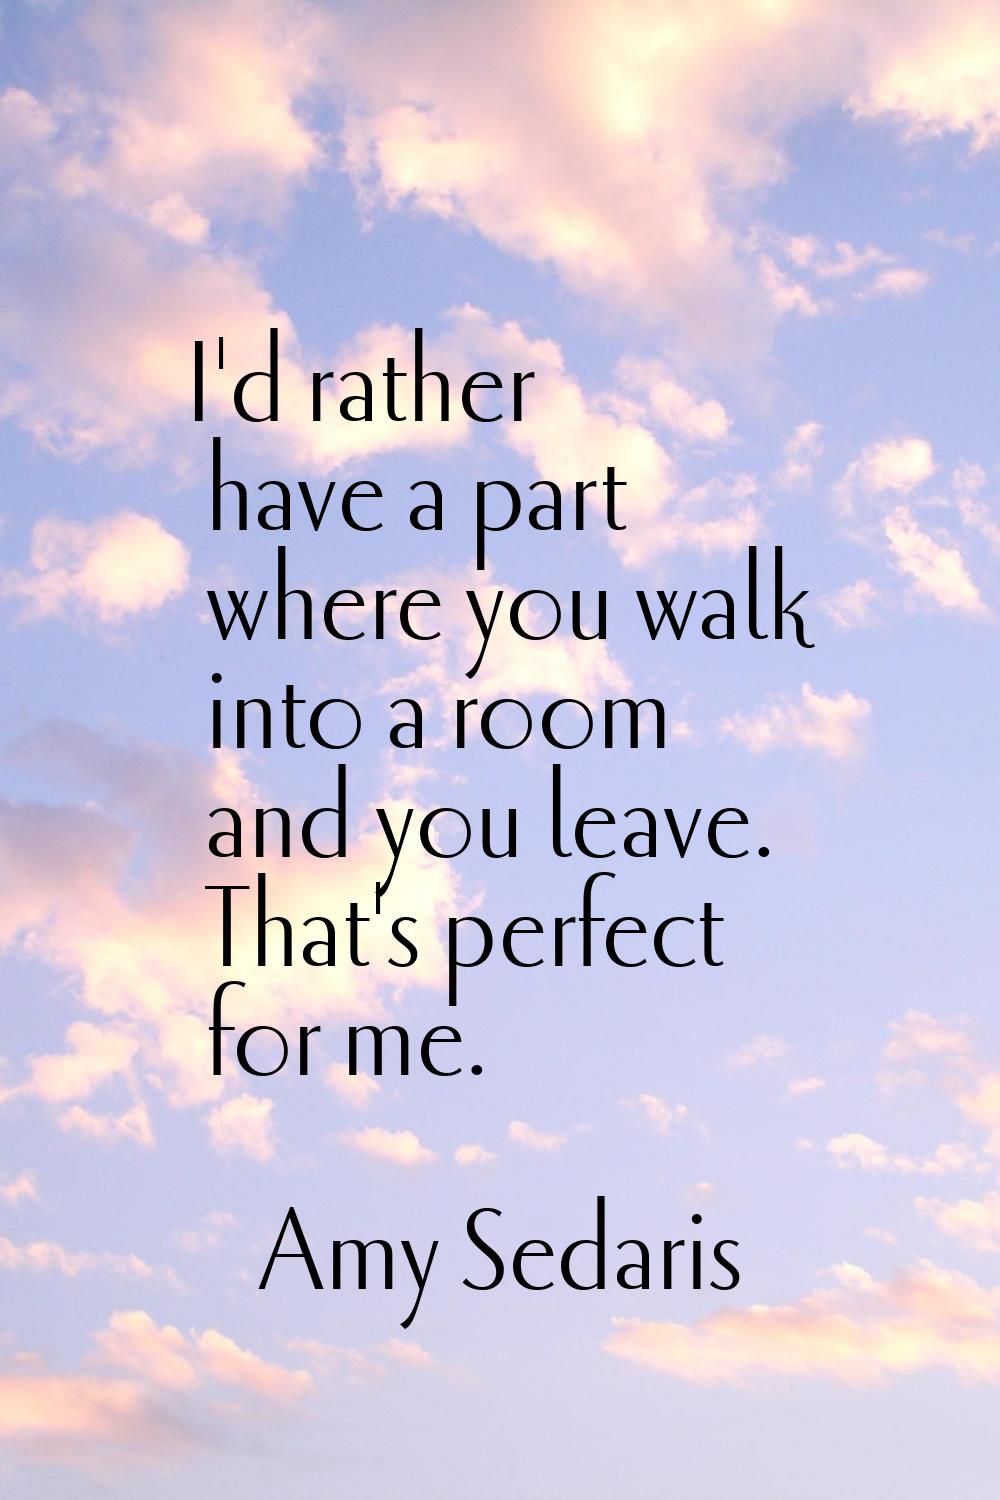 I'd rather have a part where you walk into a room and you leave. That's perfect for me.